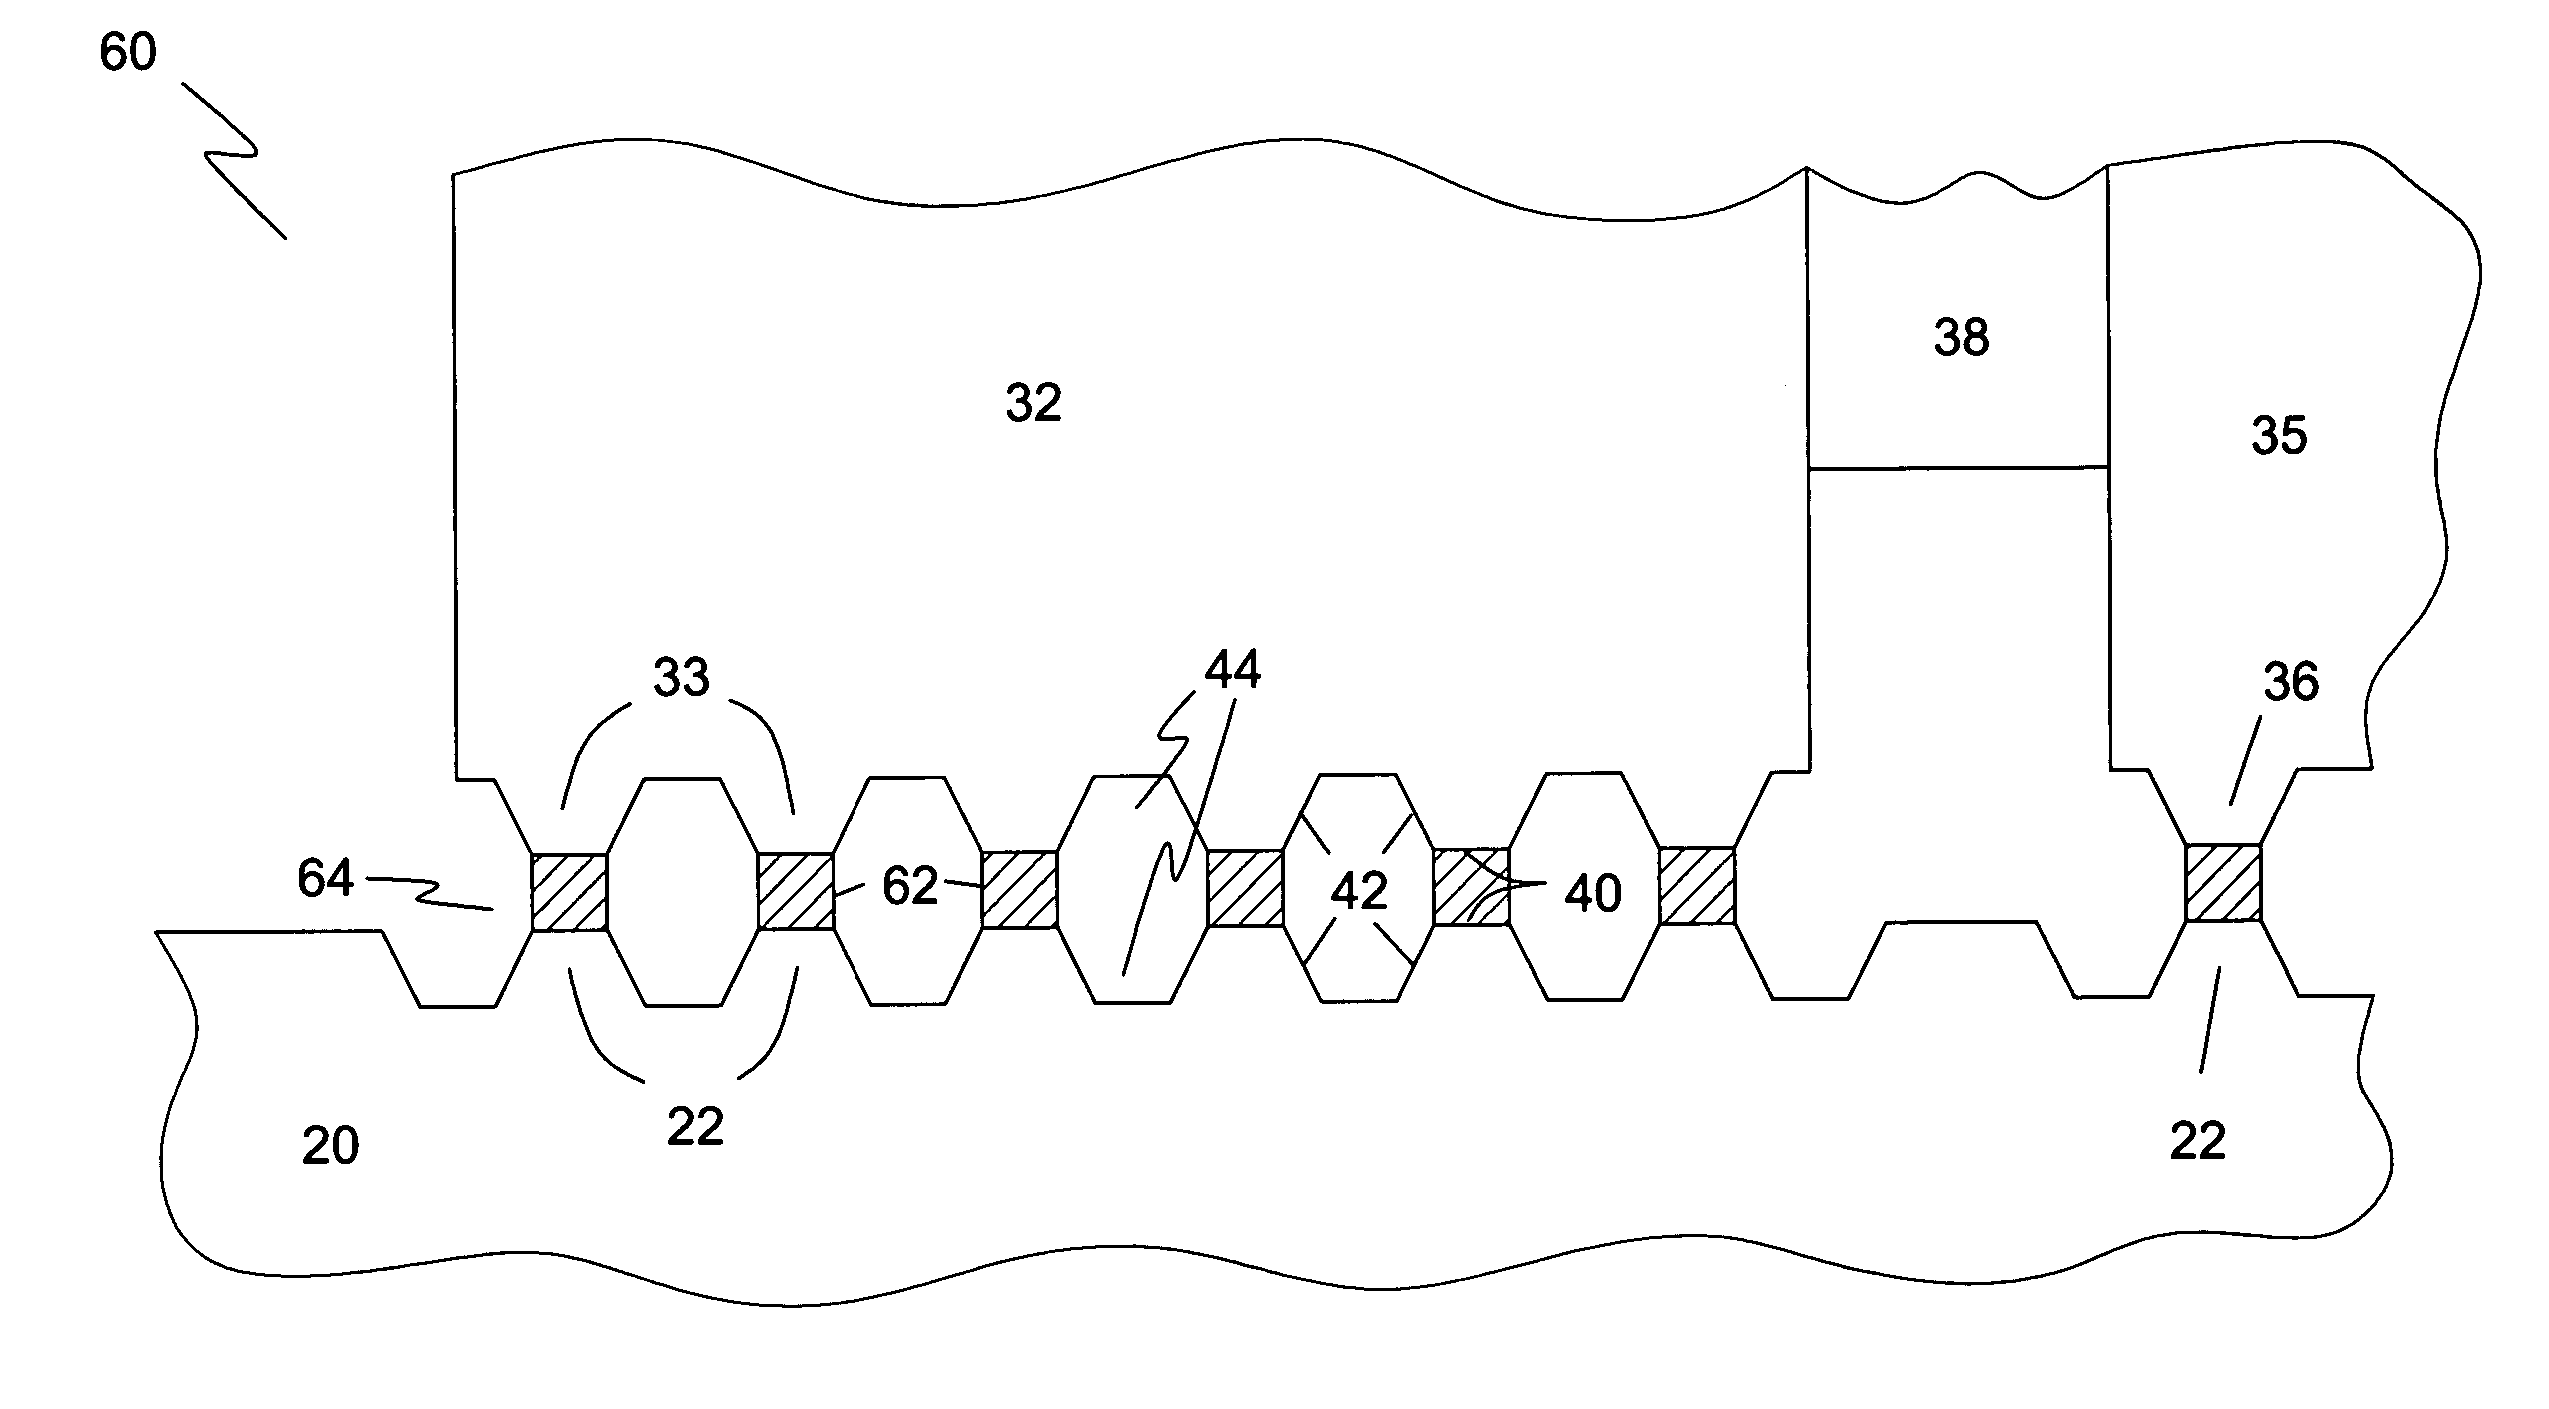 Magnetic fluidic seal with improved pressure capacity